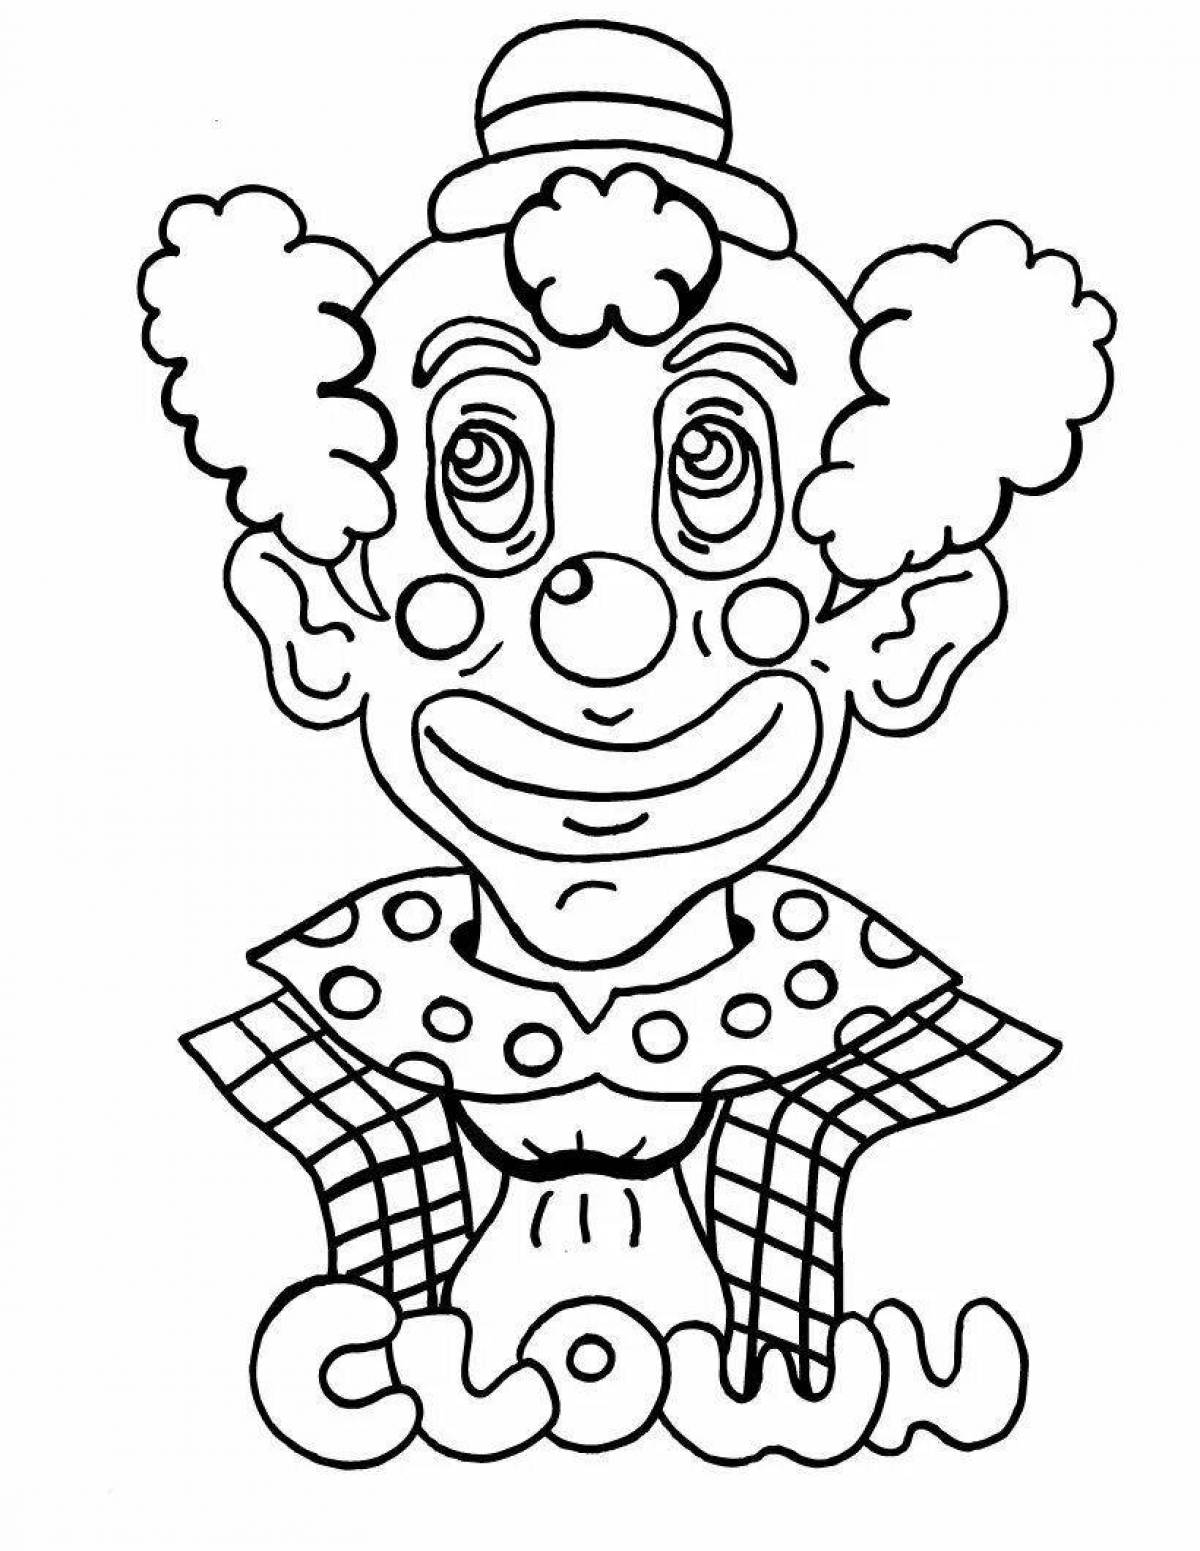 Fun drawing of a clown for children